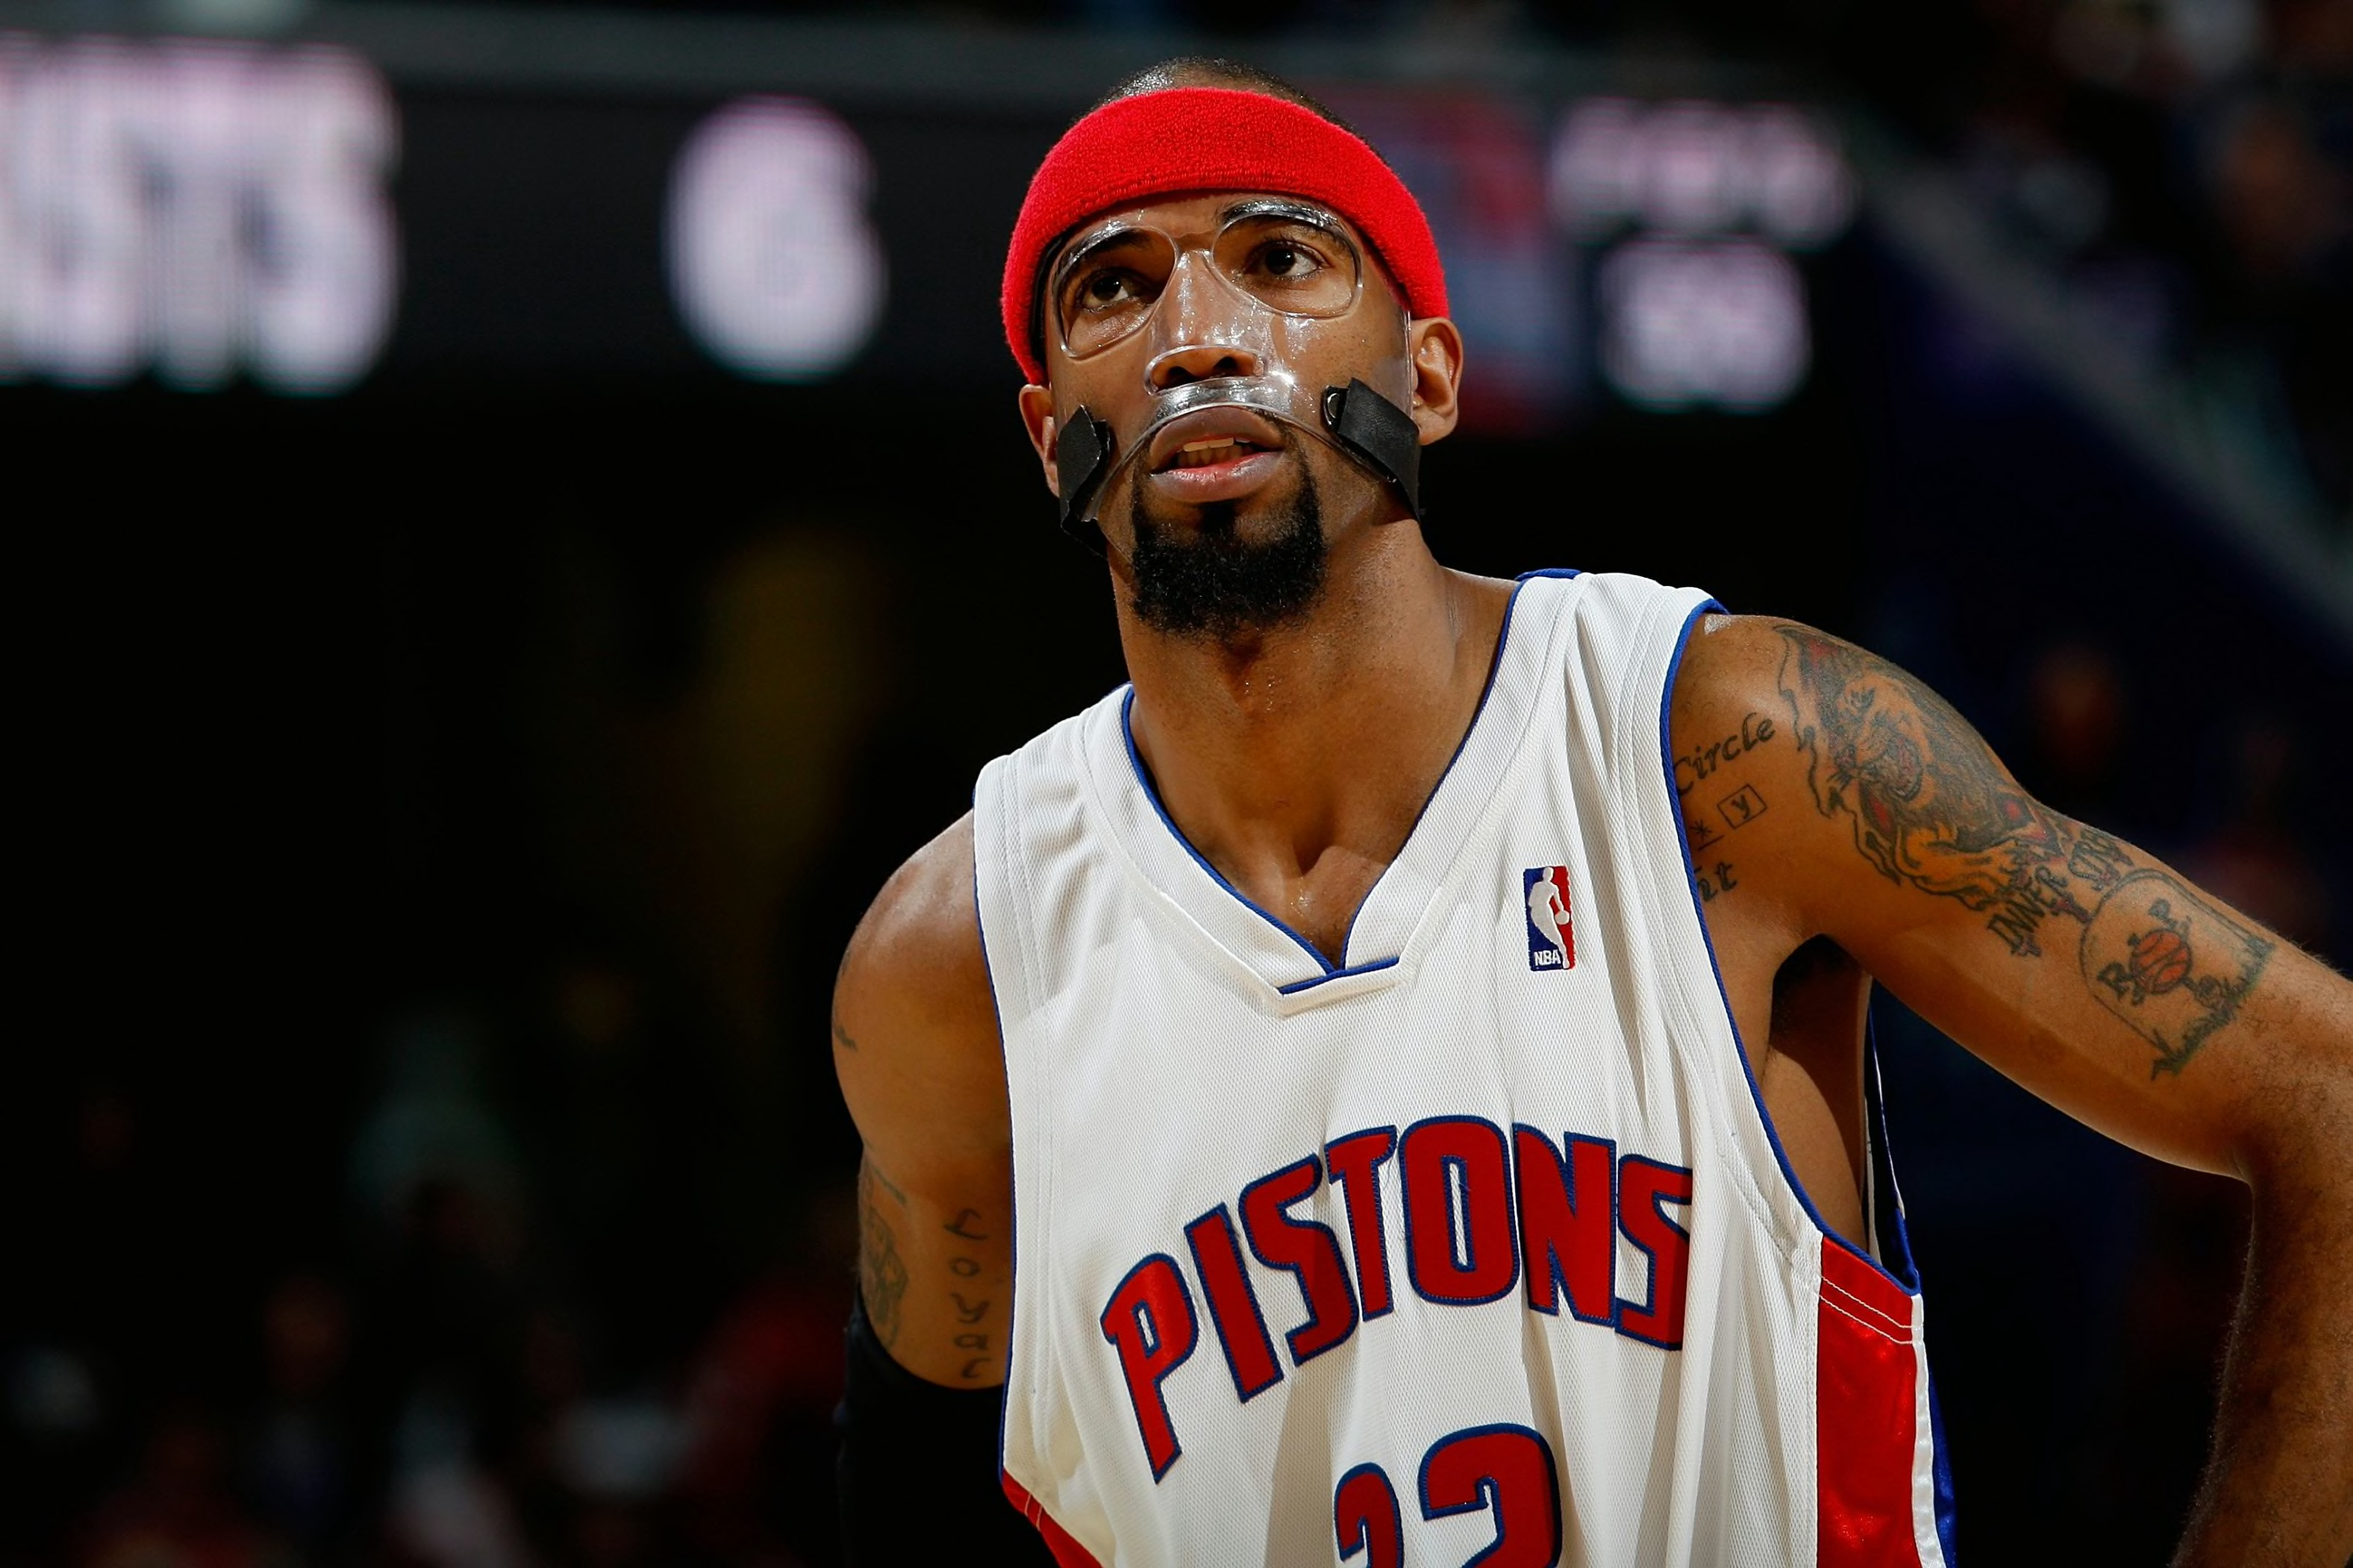 Not in Hall of Fame - 82. Richard Hamilton